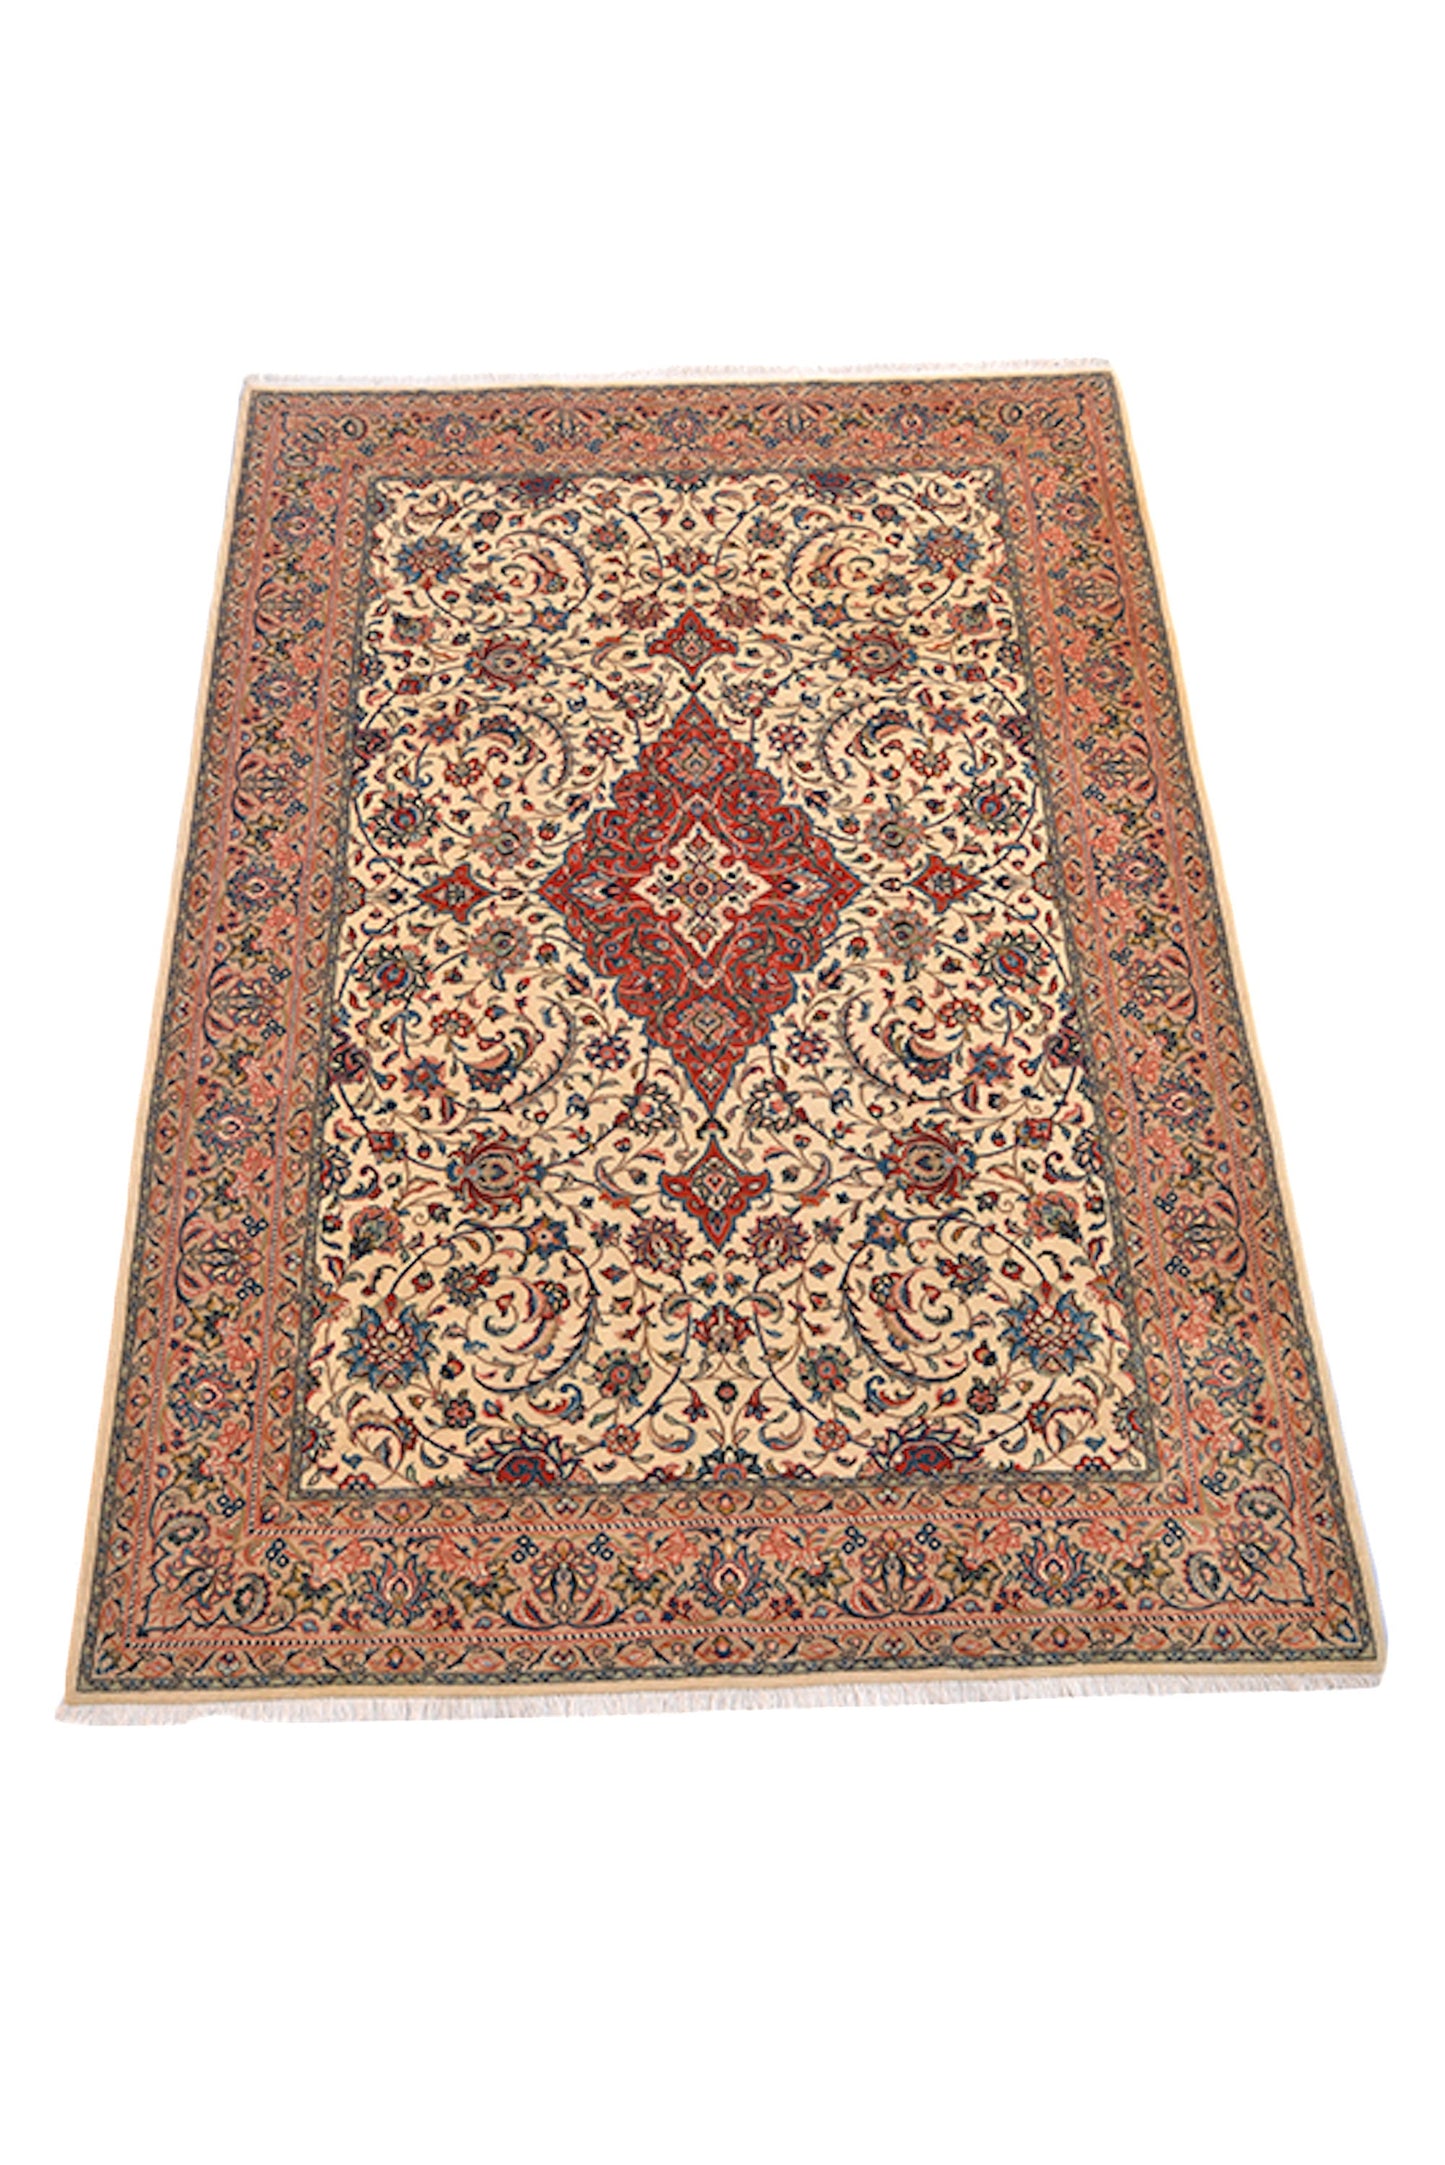 7 x 10 Feet Beige Oriental Rug| Hand Woven Area Rug | Floral Traditional Living Room Rug | Wool Antique